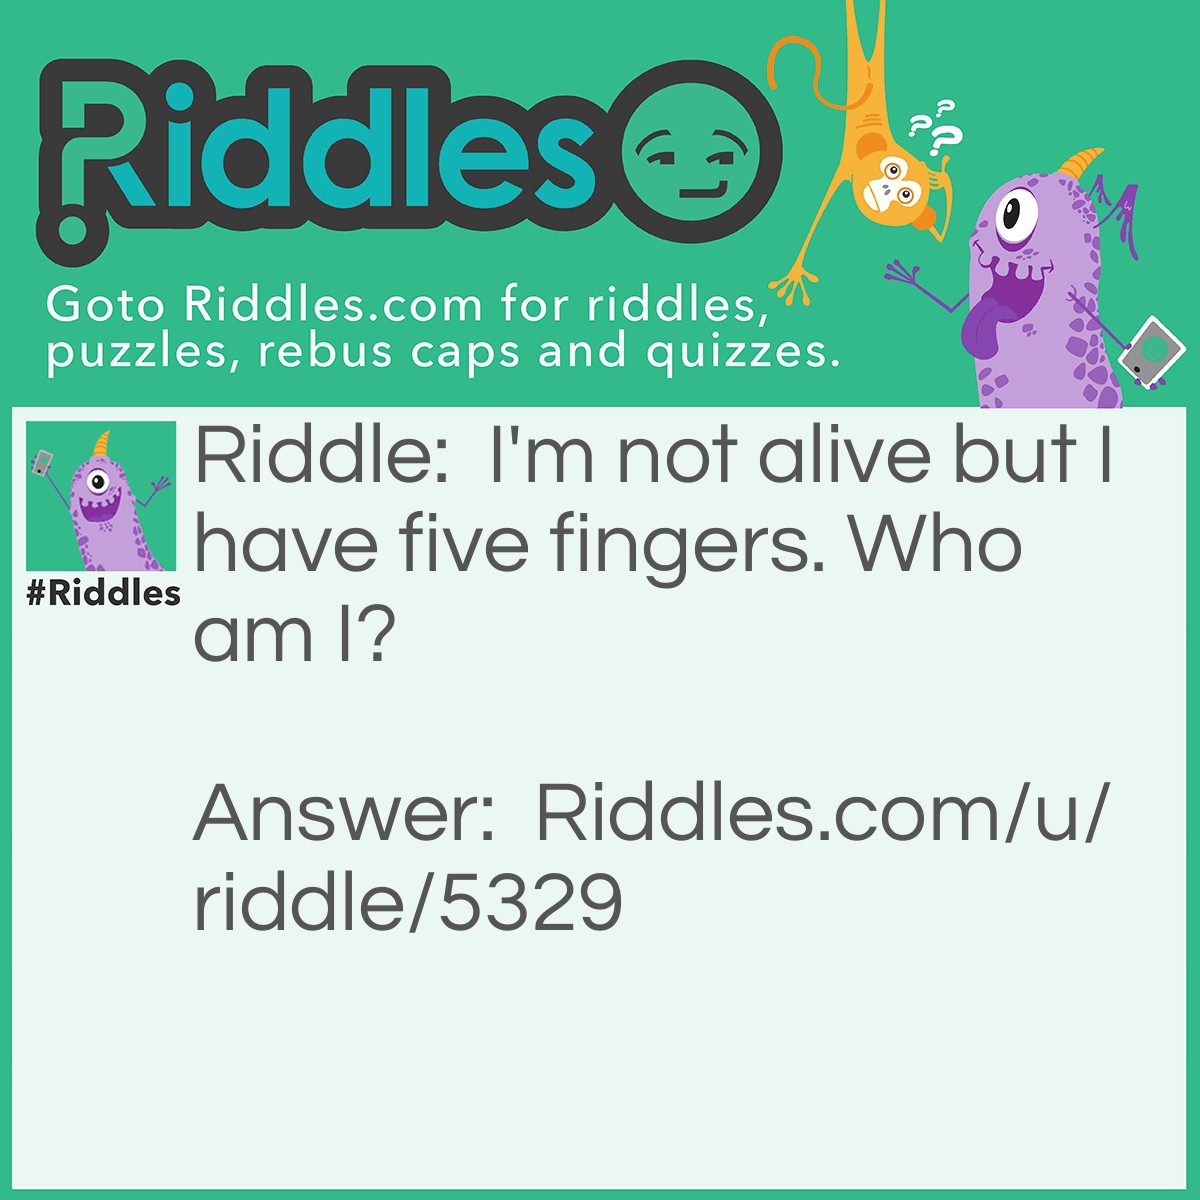 Riddle: I'm not alive but I have five fingers. What am I? Answer: A glove.